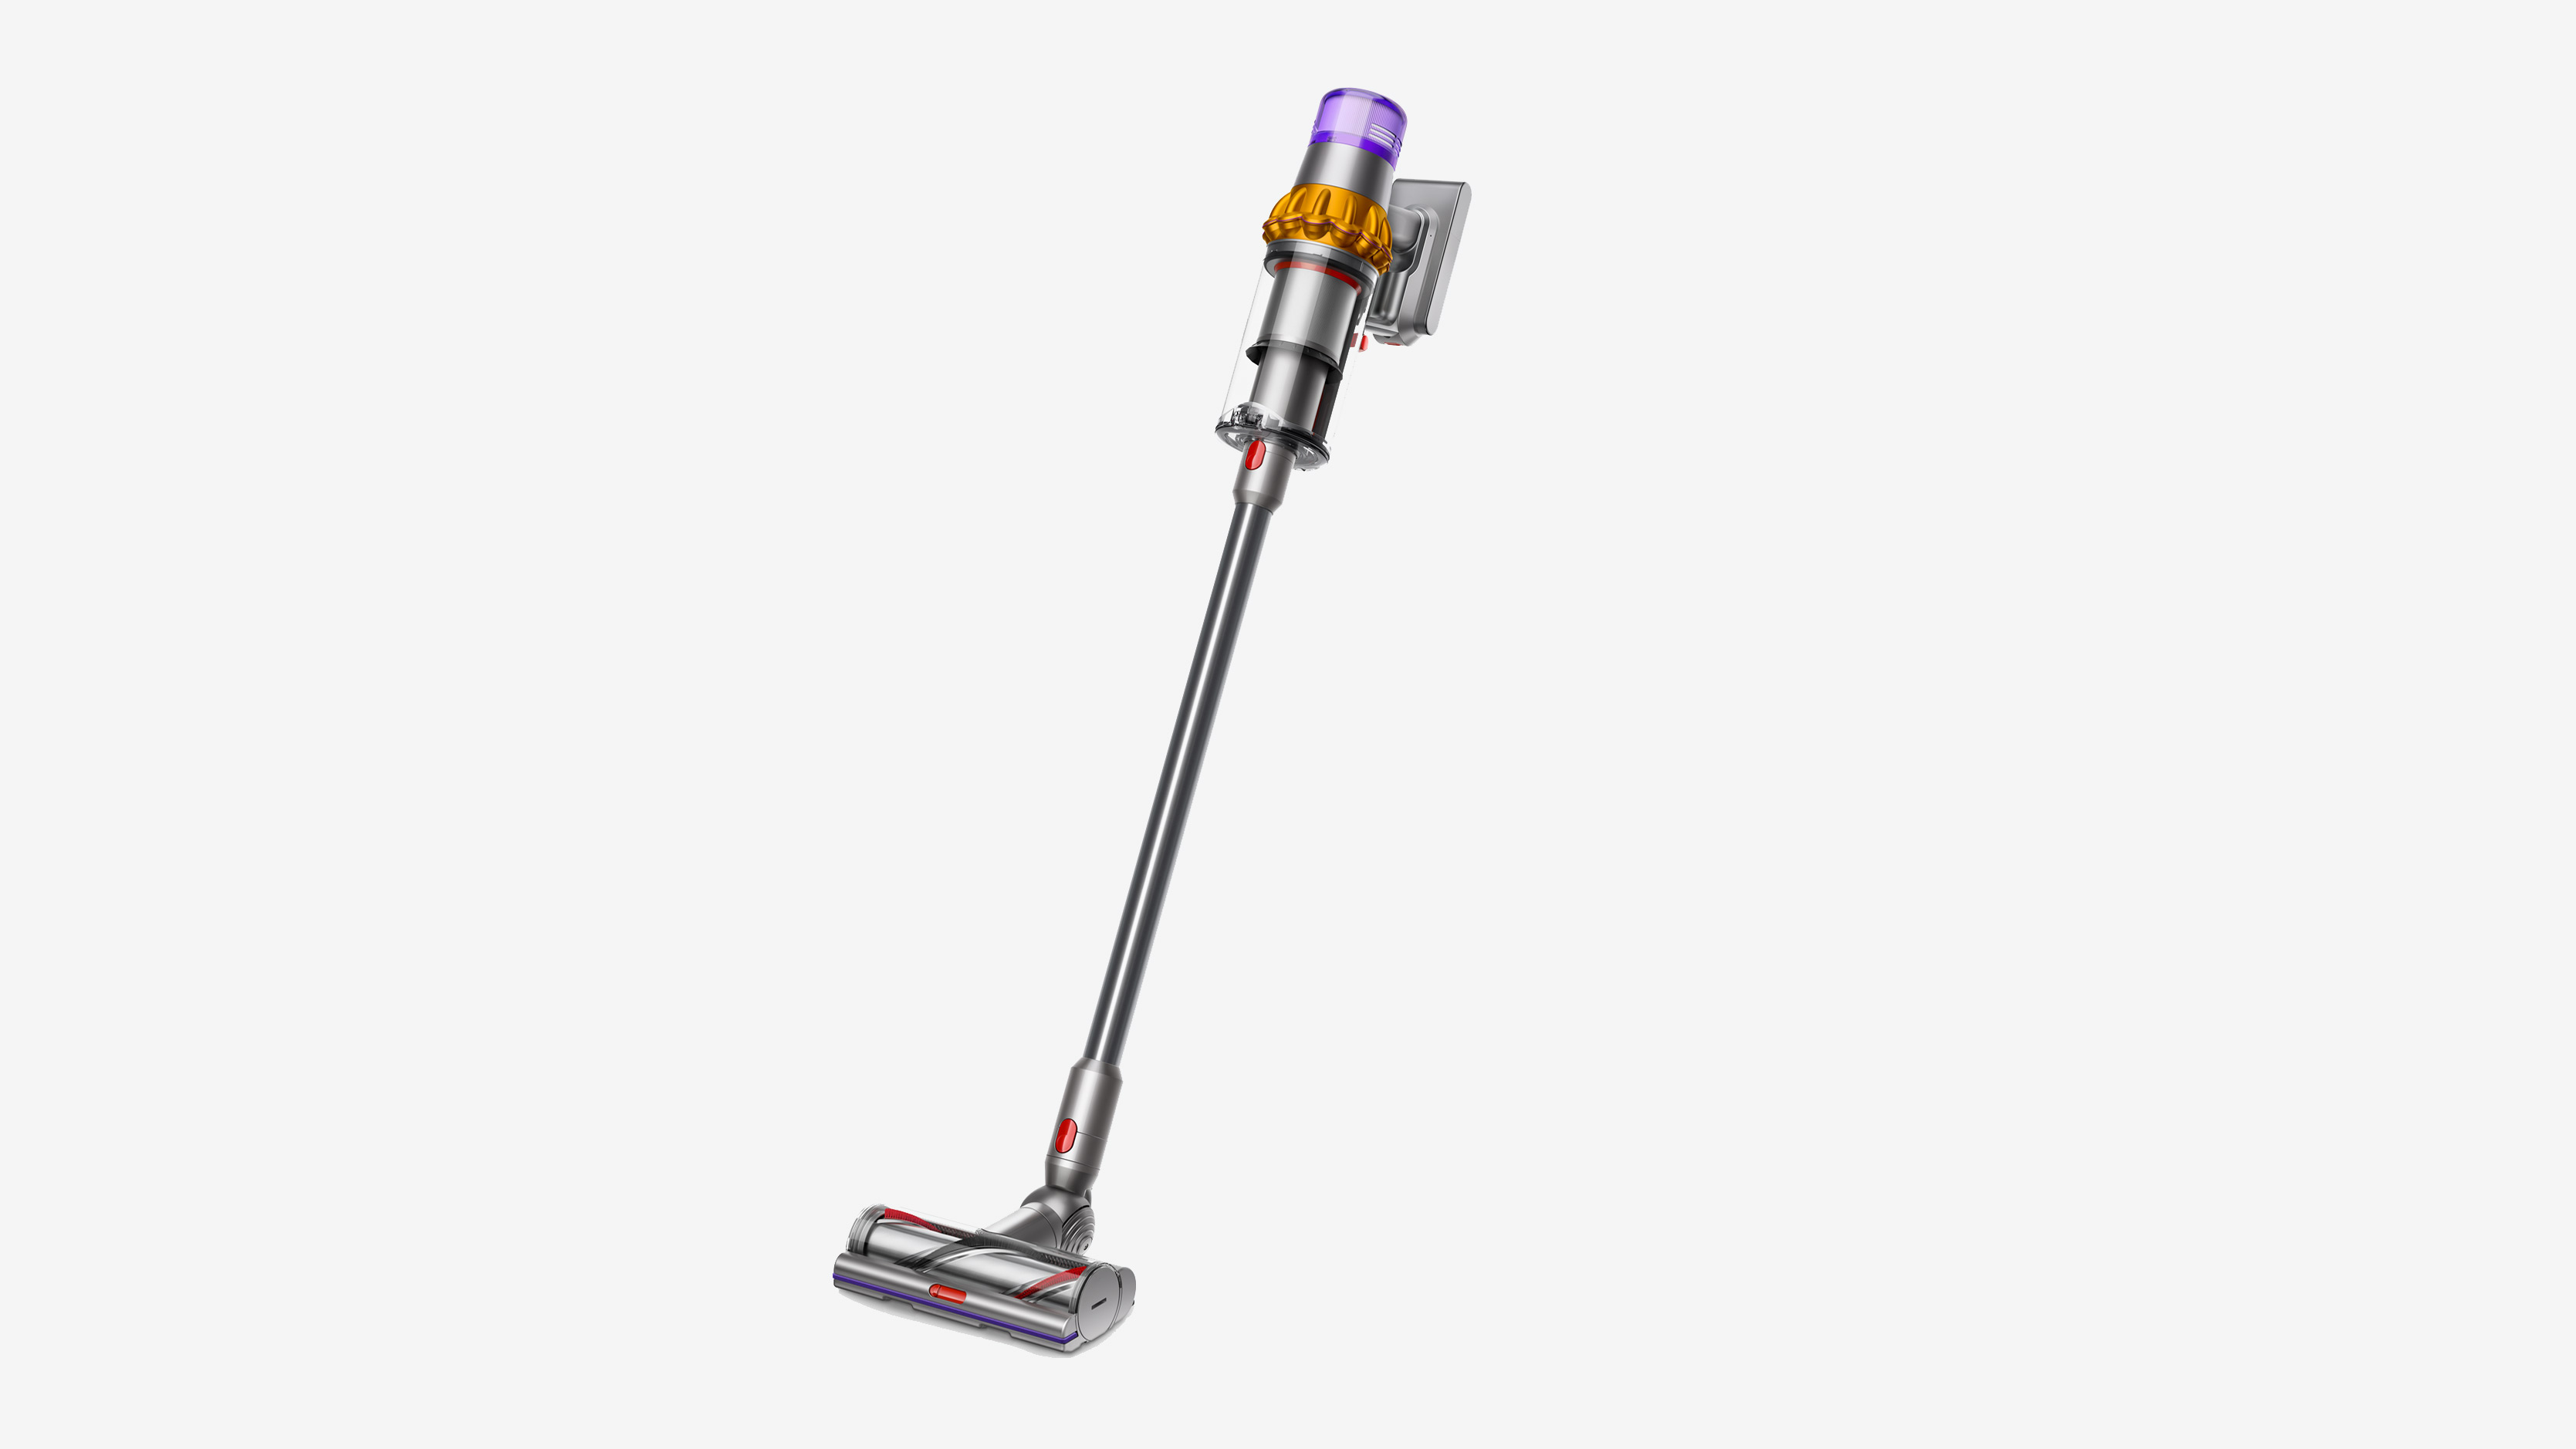 Dyson V15 Detect Absolute vacuum cleaner